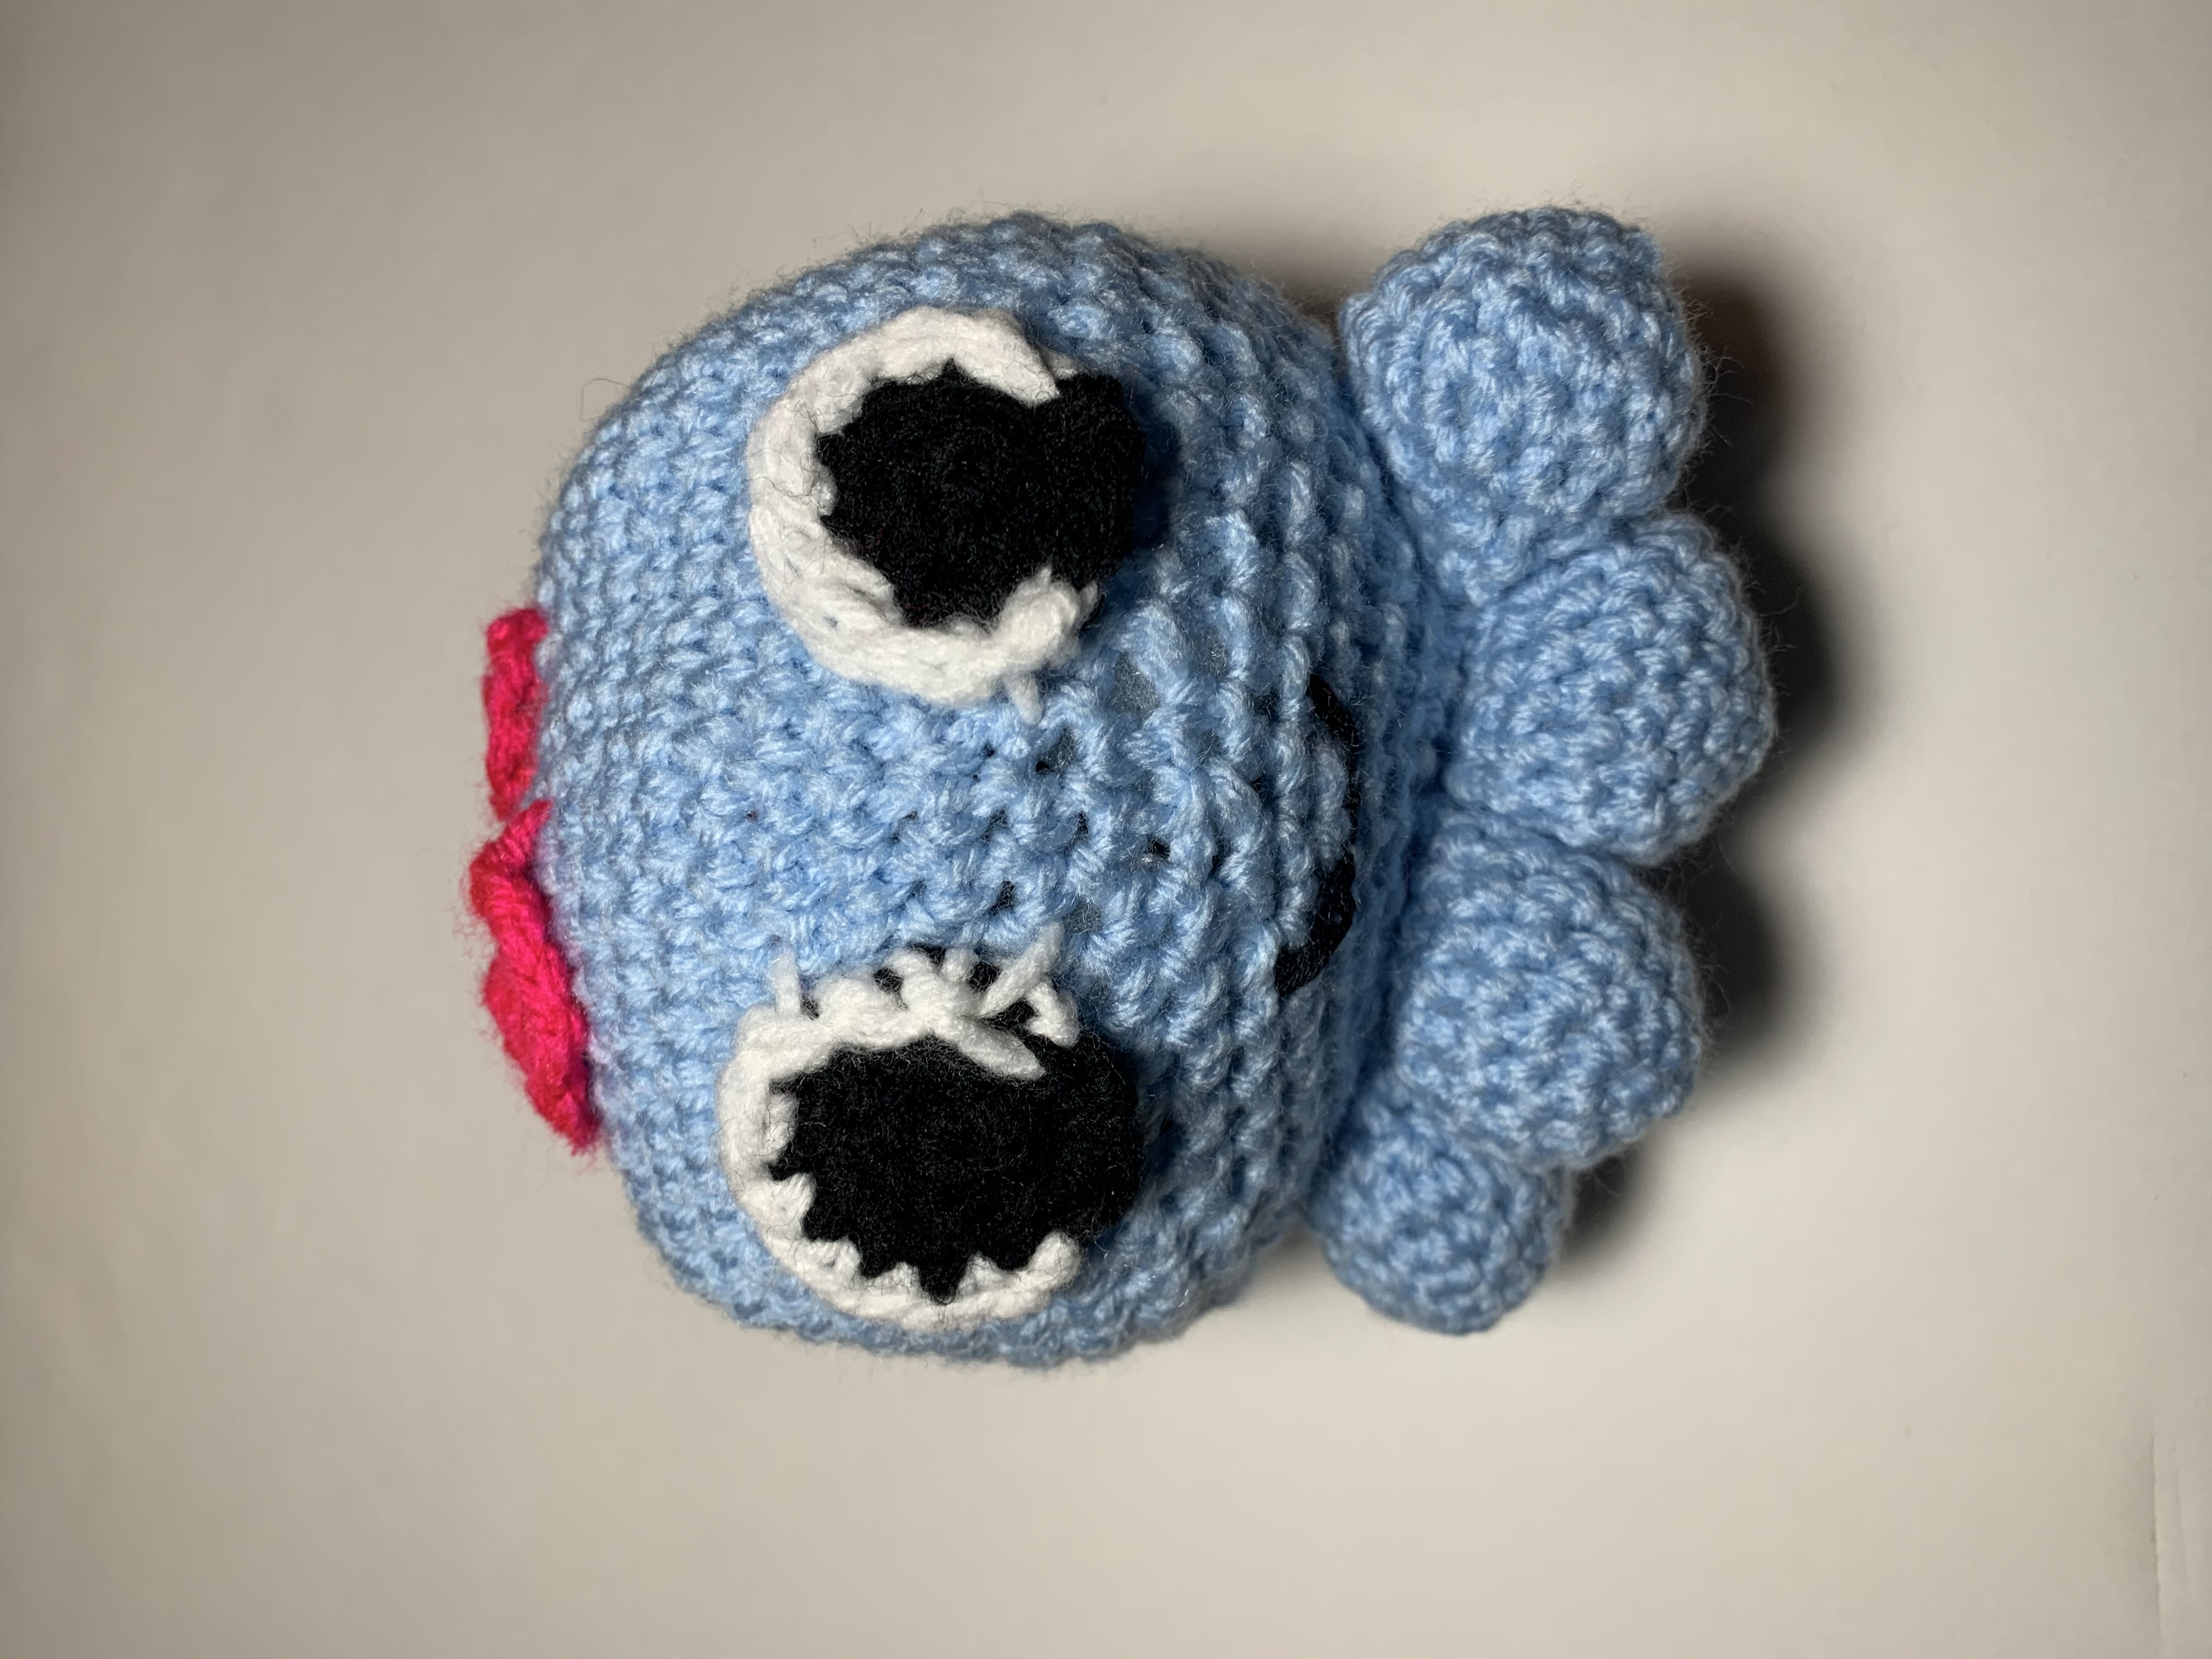 Octopus from the Sims 4 Nifty Knitting